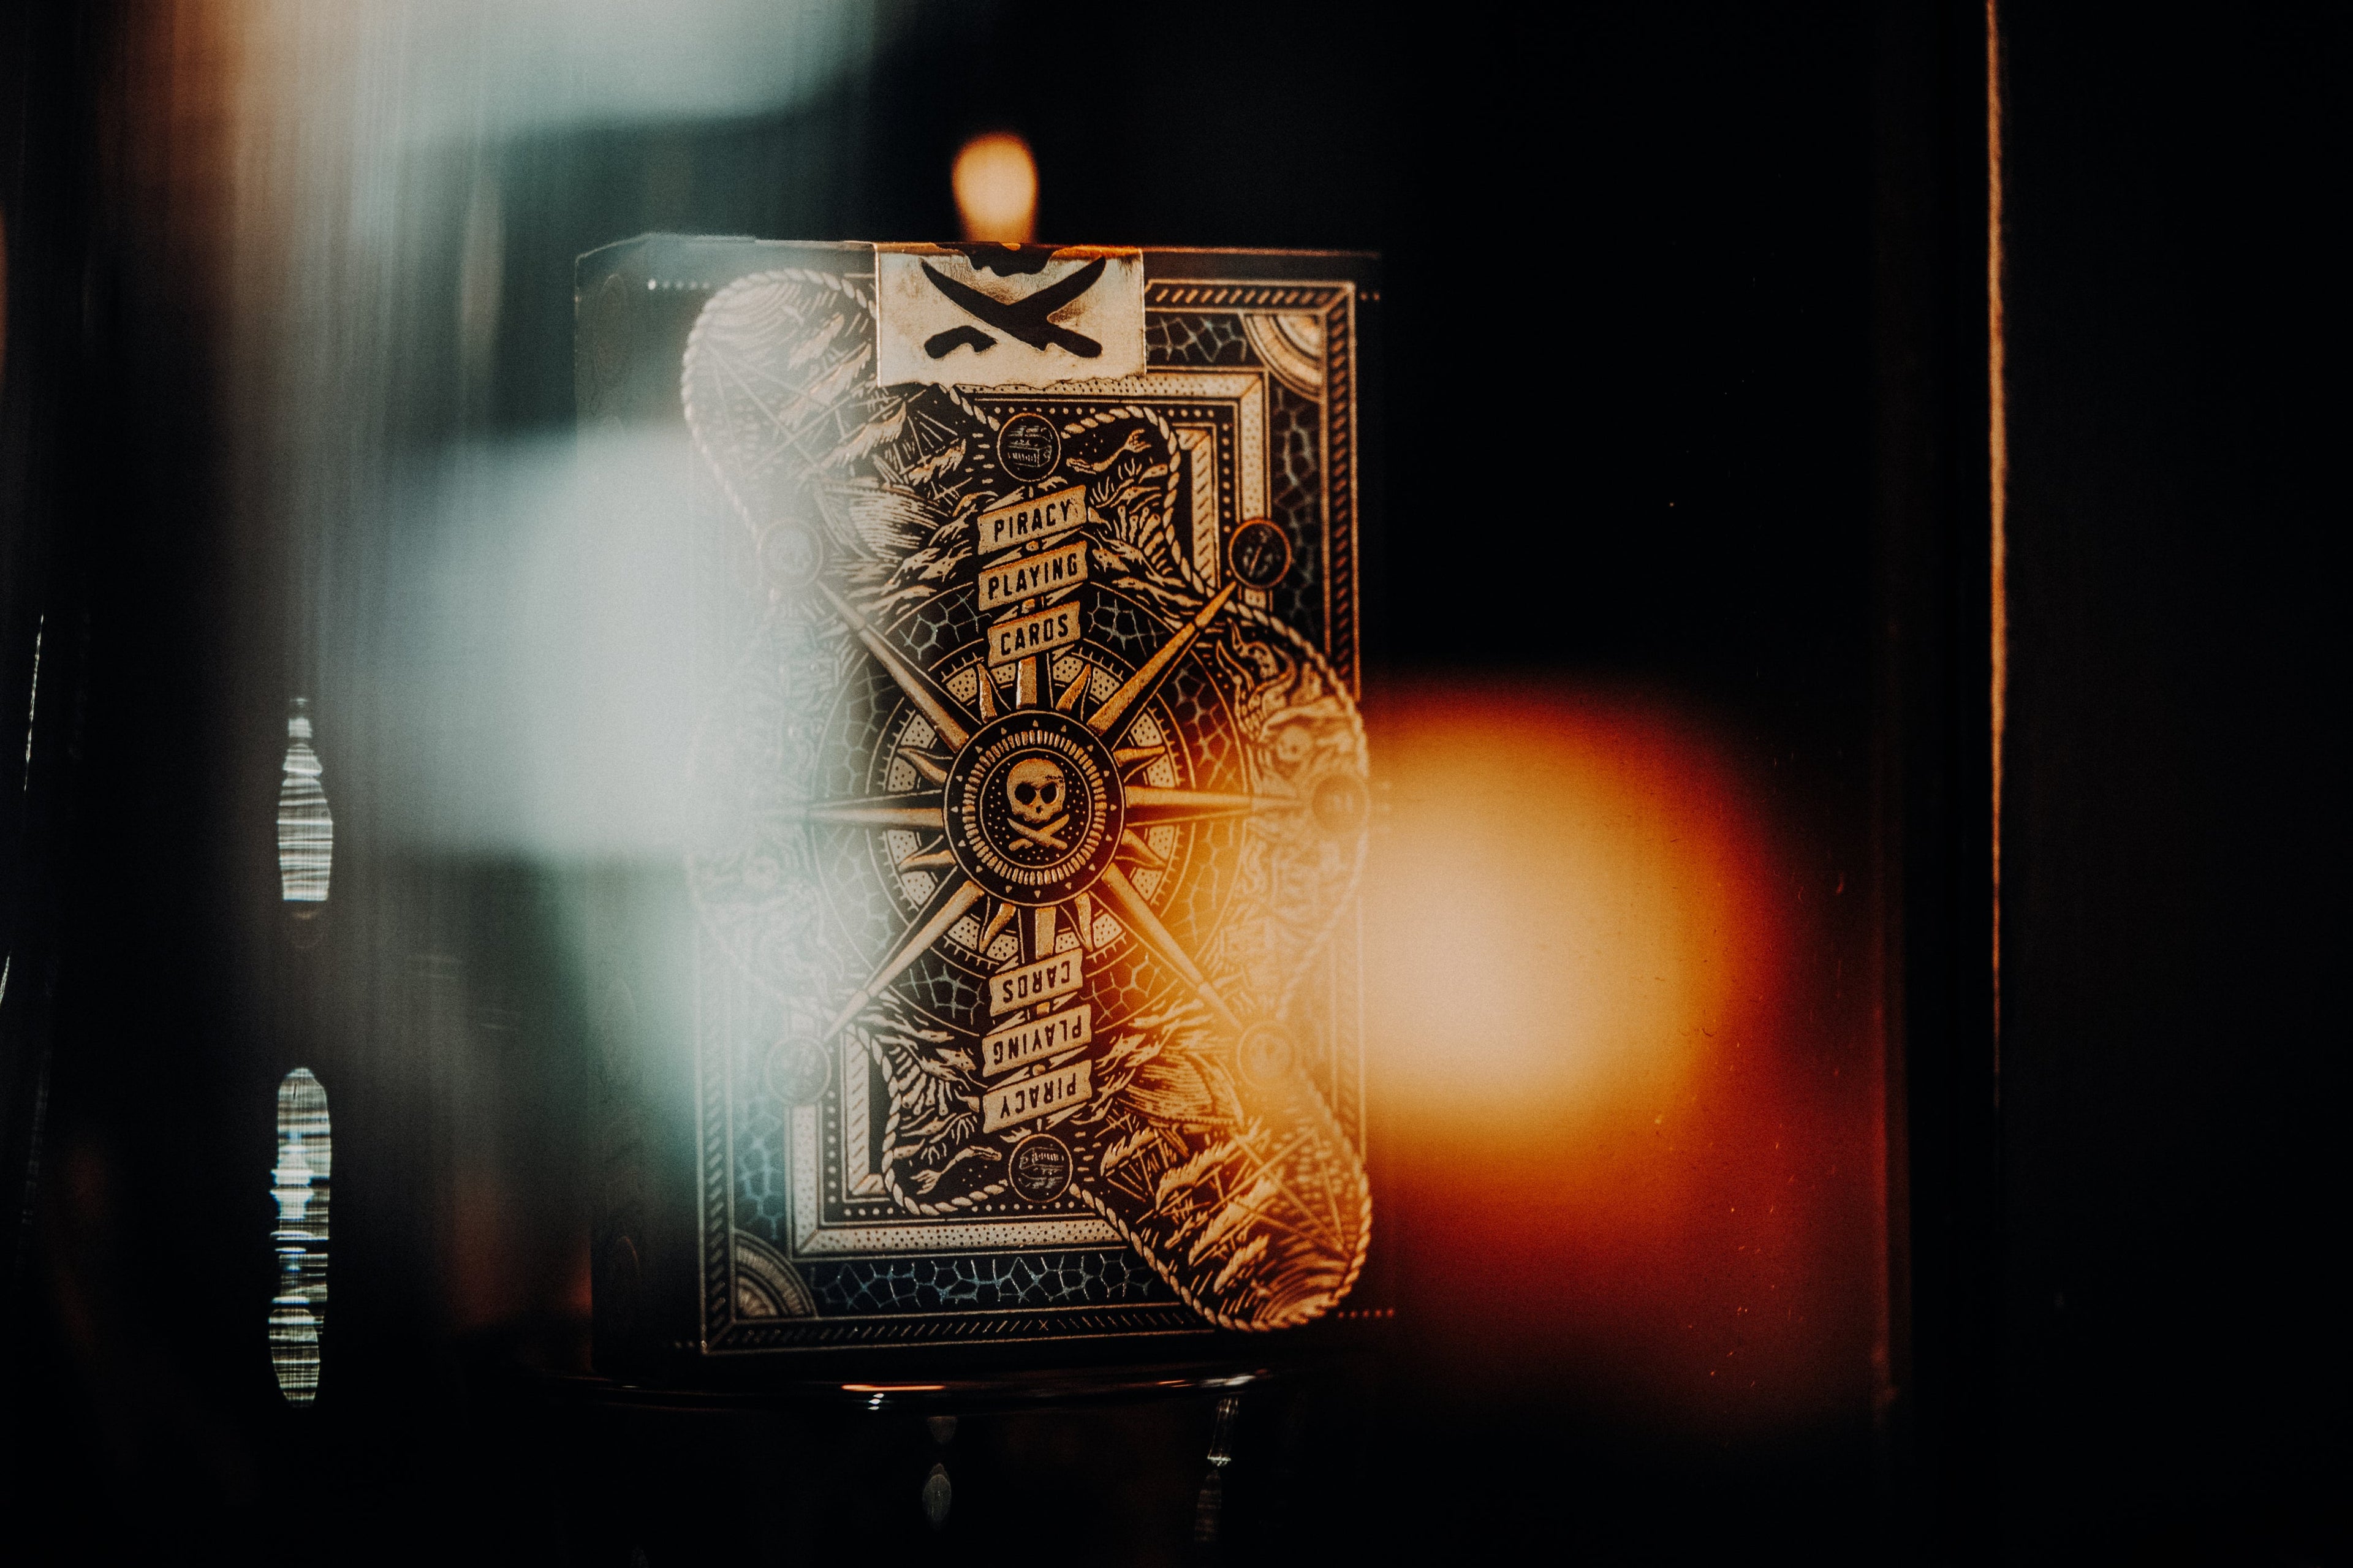 Piracy Playing Cards by Peter McKinnon